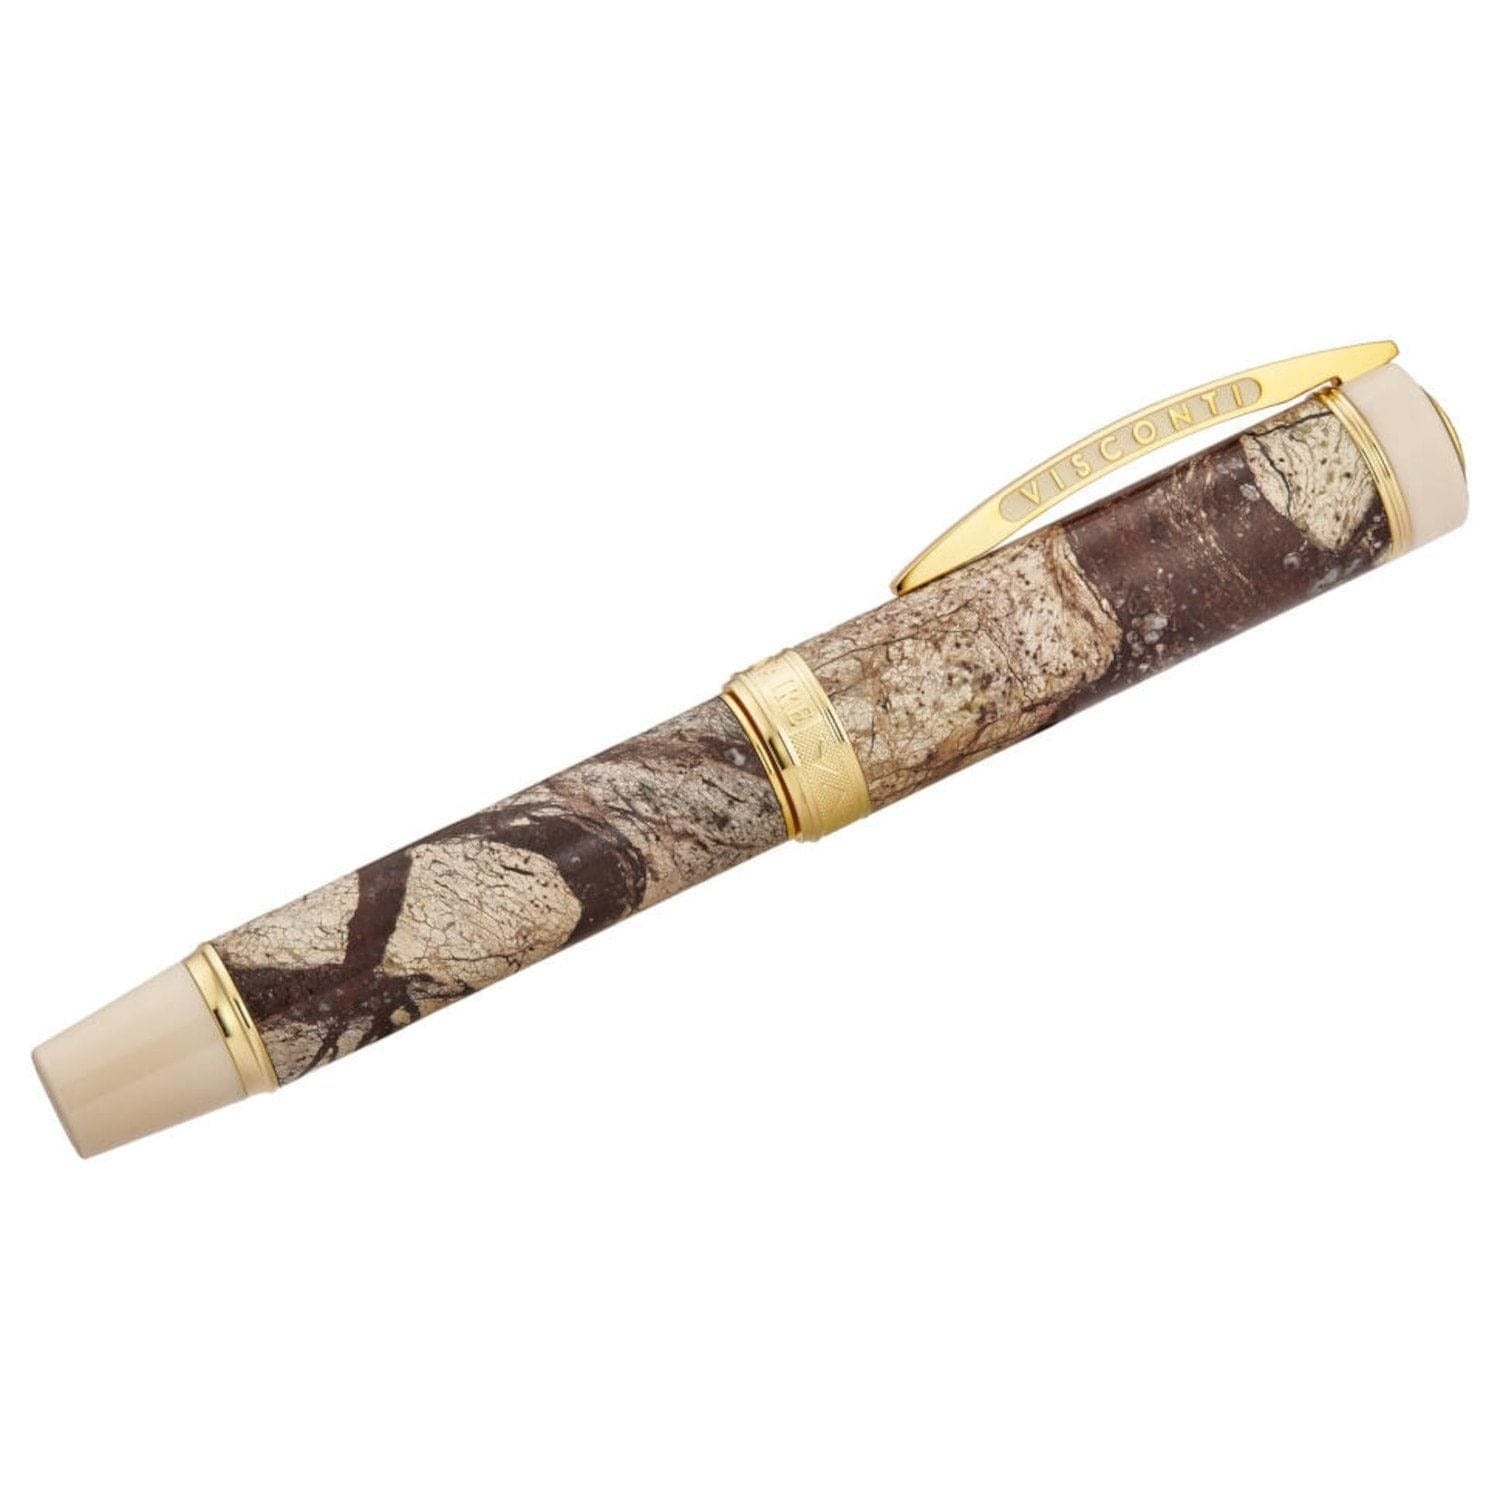 A Visconti 685RL02 'Millionaire' Rain Forest Brown Marble rollerball pen with a camouflage pattern and gold trim.